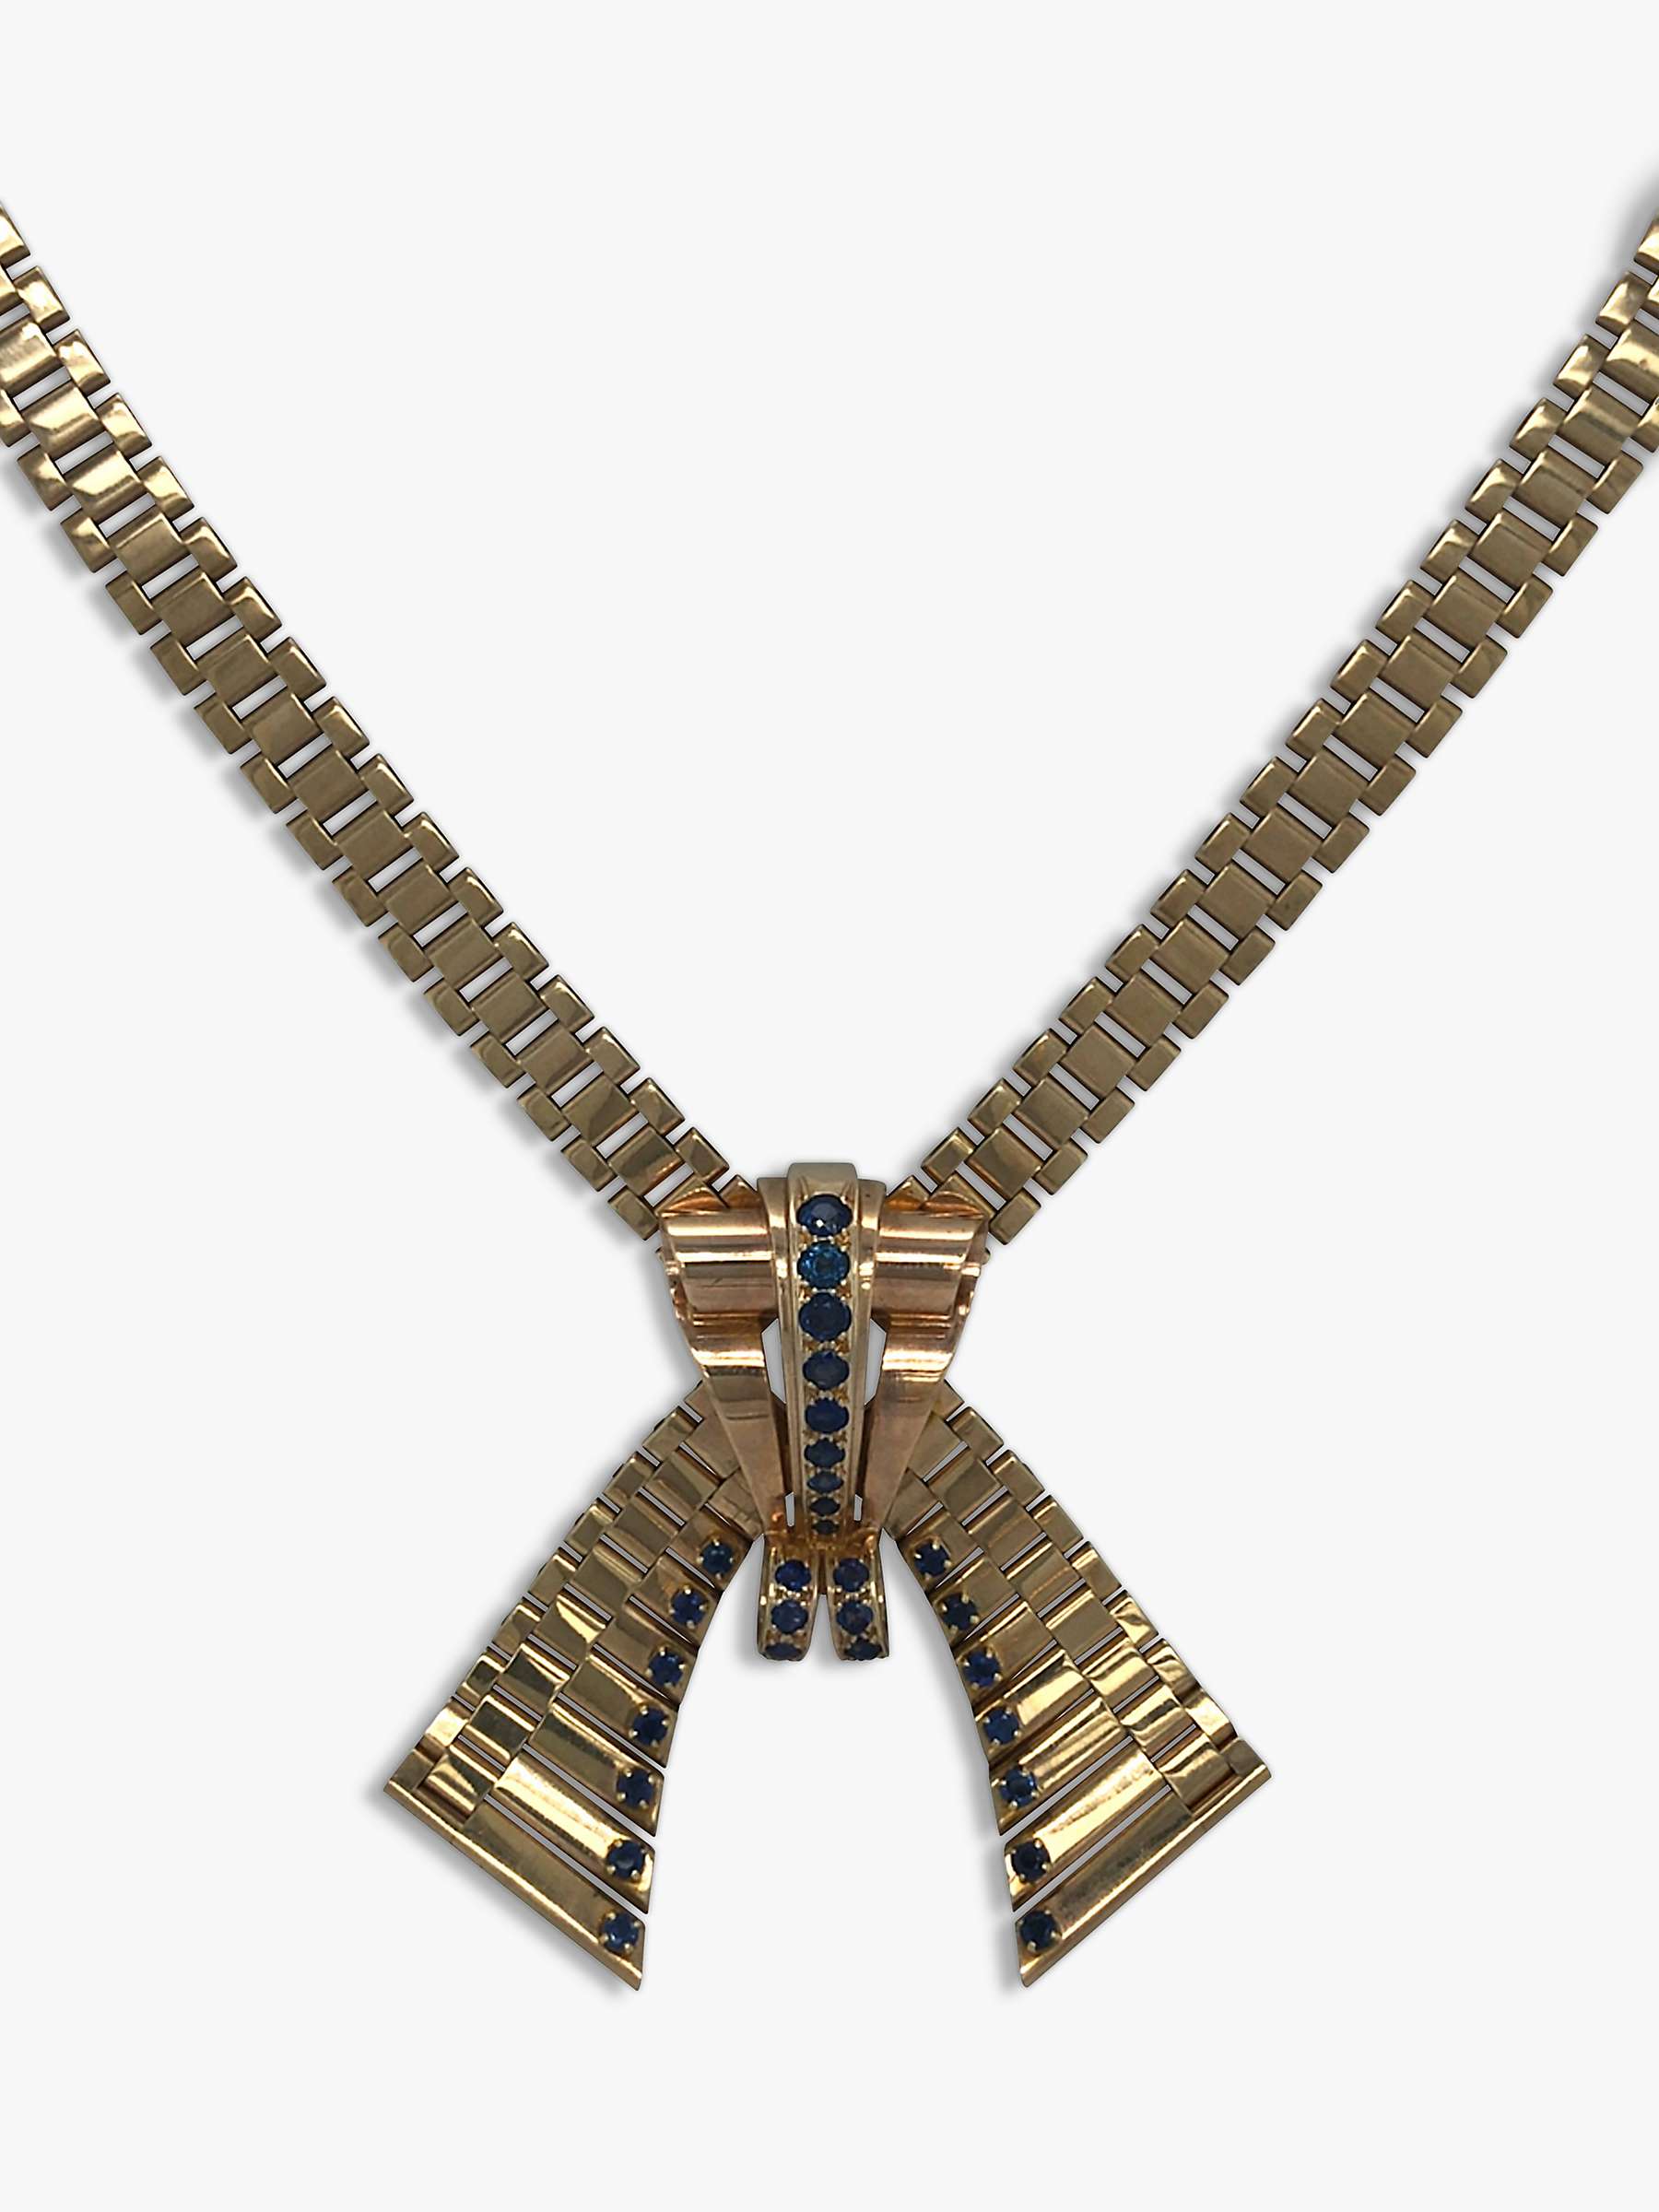 Buy Vintage Fine Jewellery Second Hand 9ct Yellow Gold Sapphire Gate Link Collar Necklace, Dated London 1961 Online at johnlewis.com